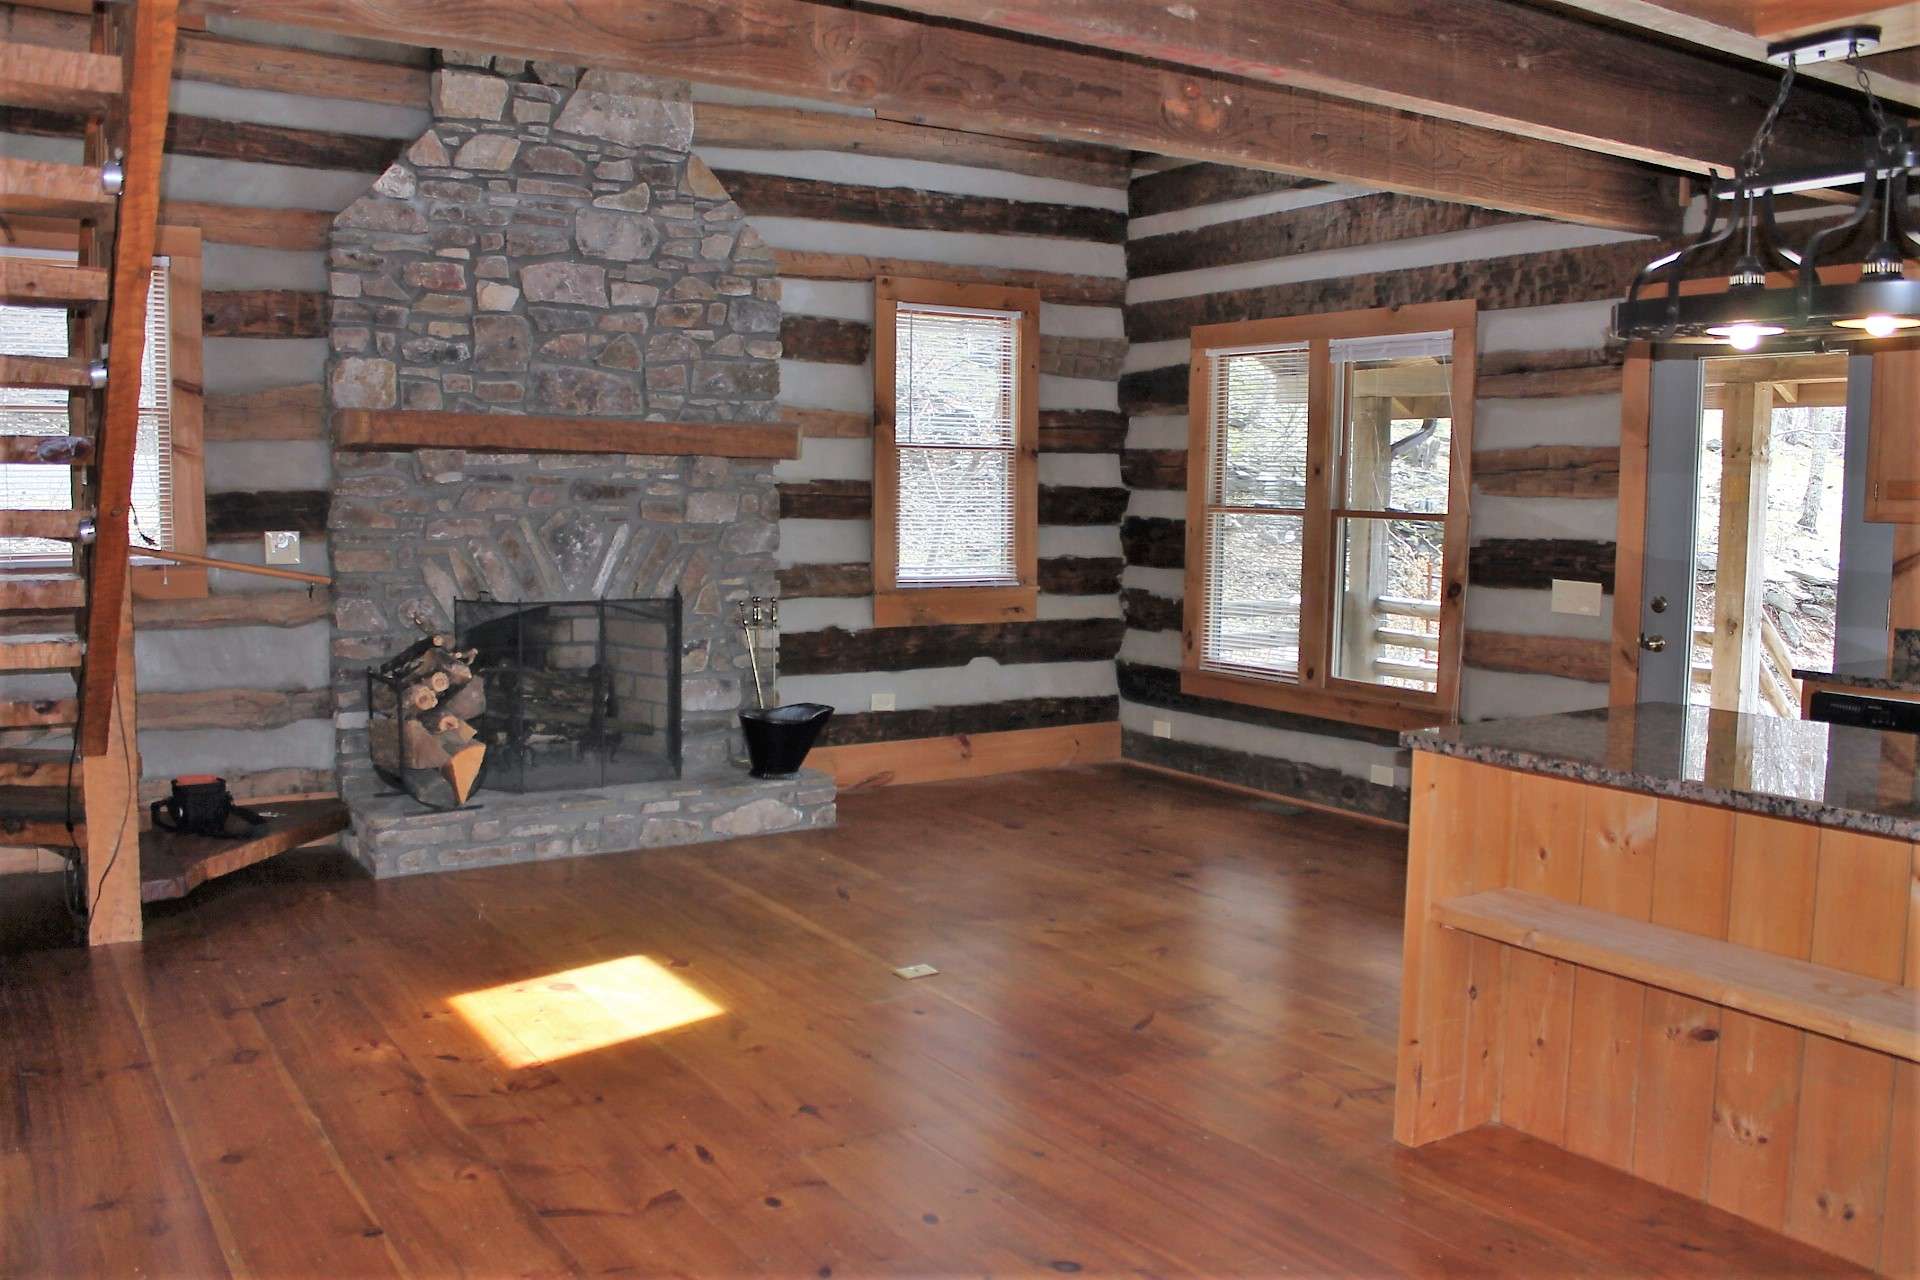 The interior features an open floor plan with wide-plank wood flooring throughout.